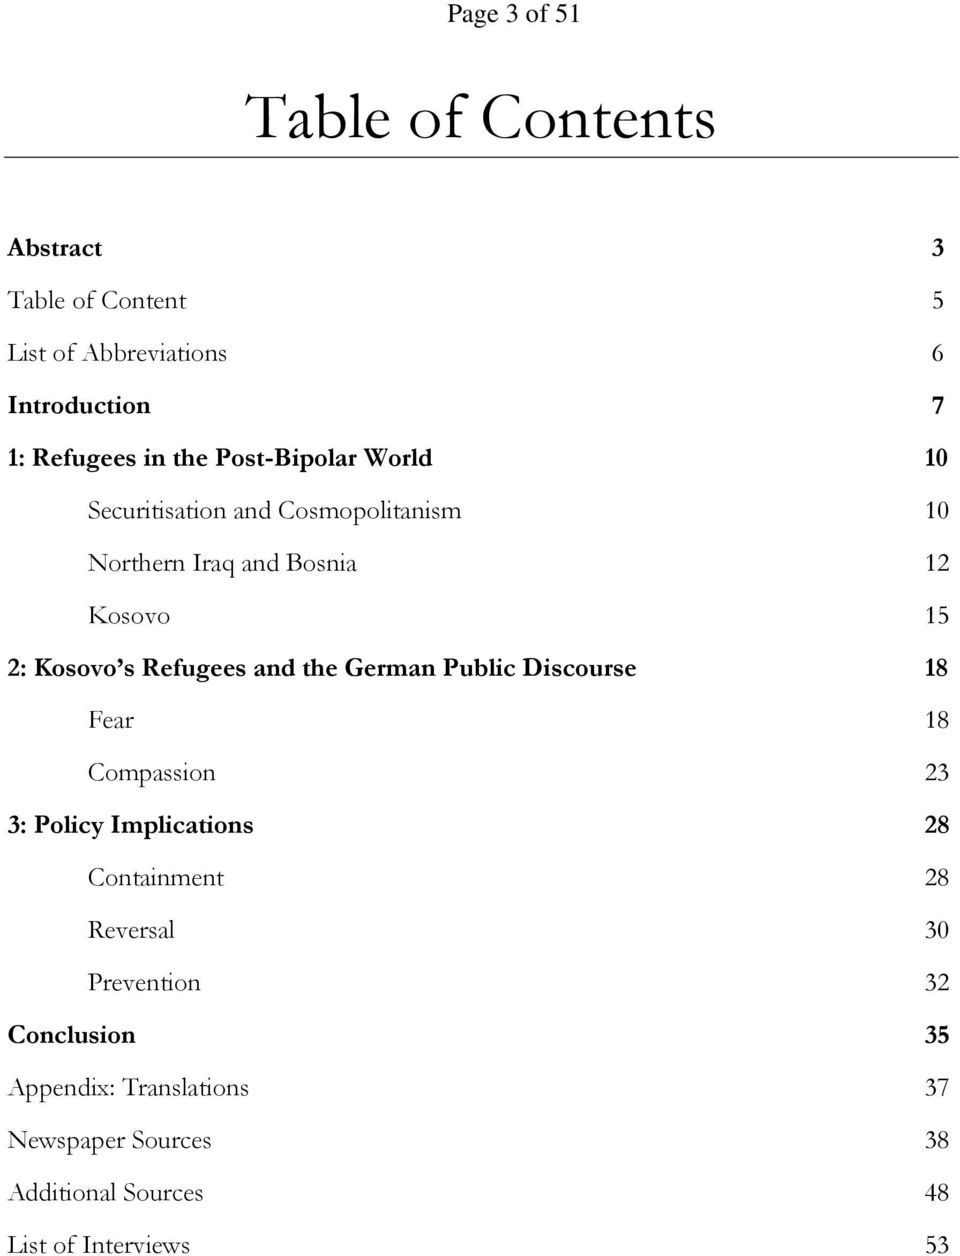 Refugees and the German Public Discourse 18 Fear 18 Compassion 23 3: Policy Implications 28 Containment 28 Reversal